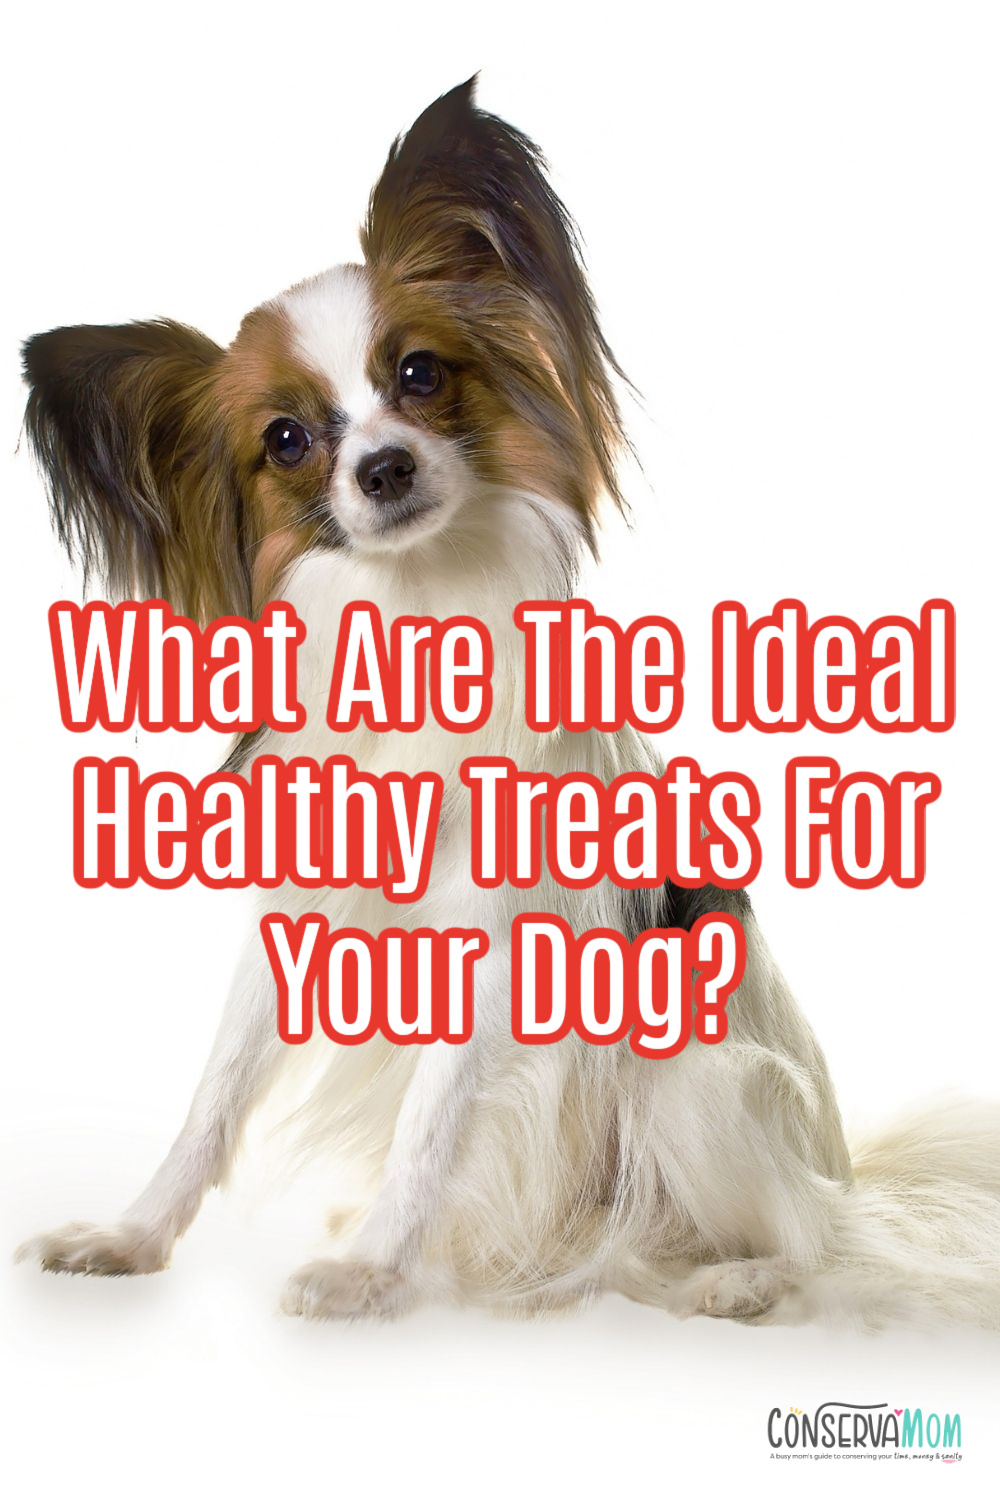 What Are The Ideal Healthy Treats For Your Dog?